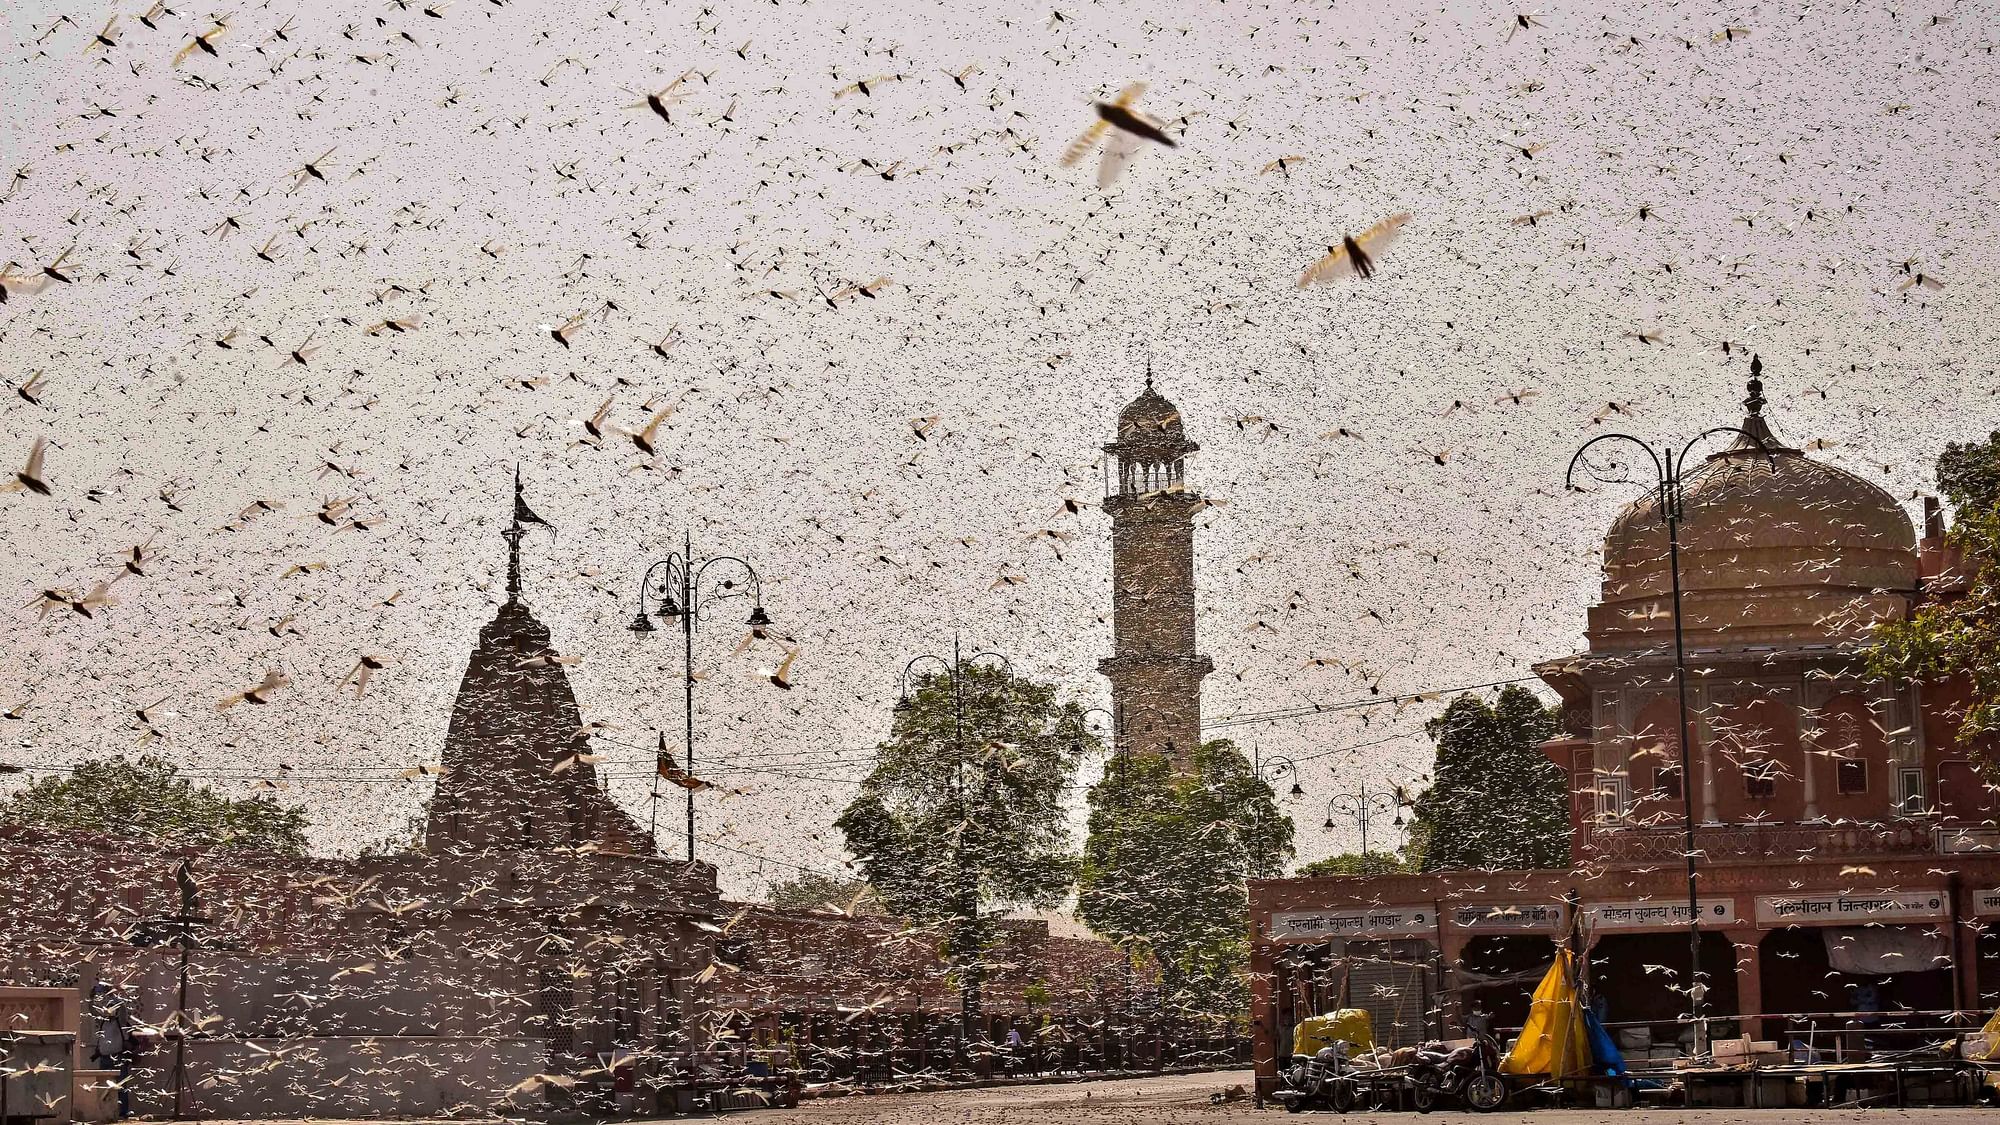 Swarms of locust were seen in the walled city of Jaipur on Monday, 25 May. 